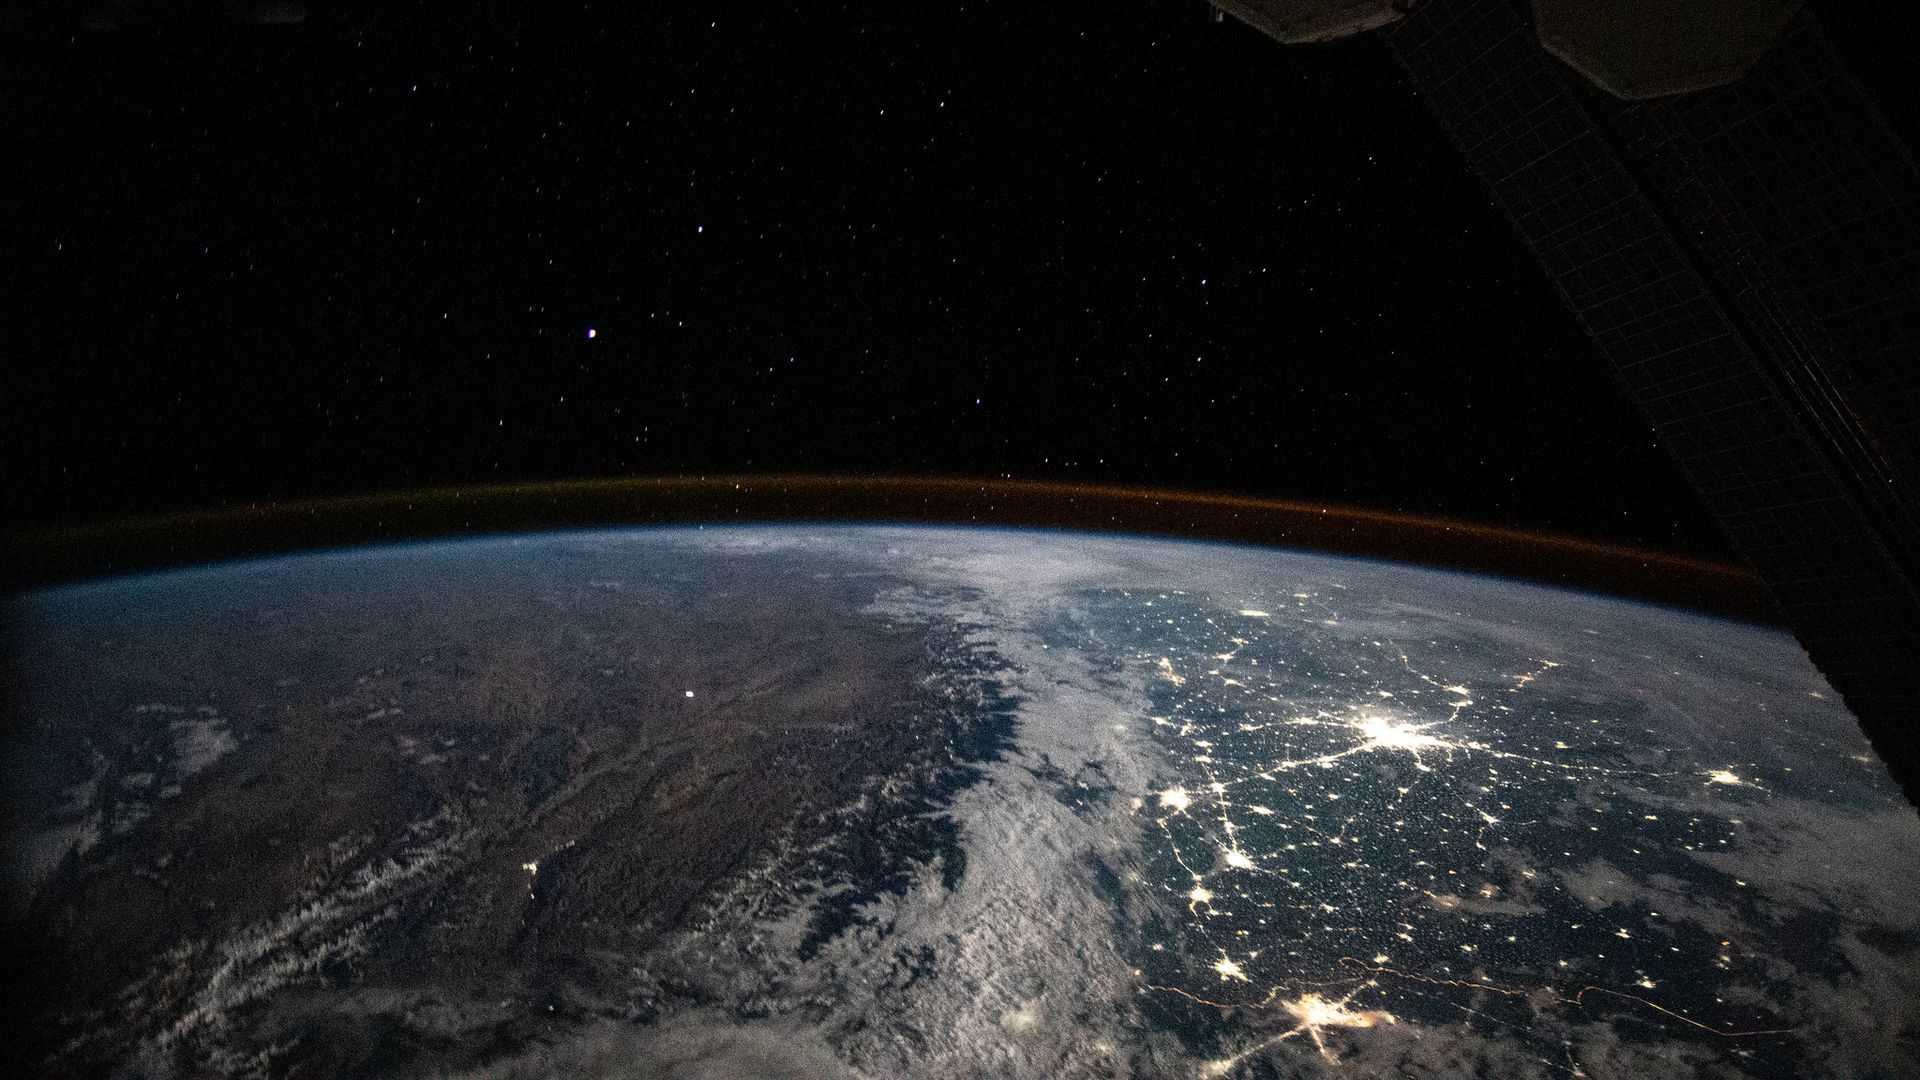 The earth seen from the International Space Station, with city lights distantly connected on the surface of the planet 